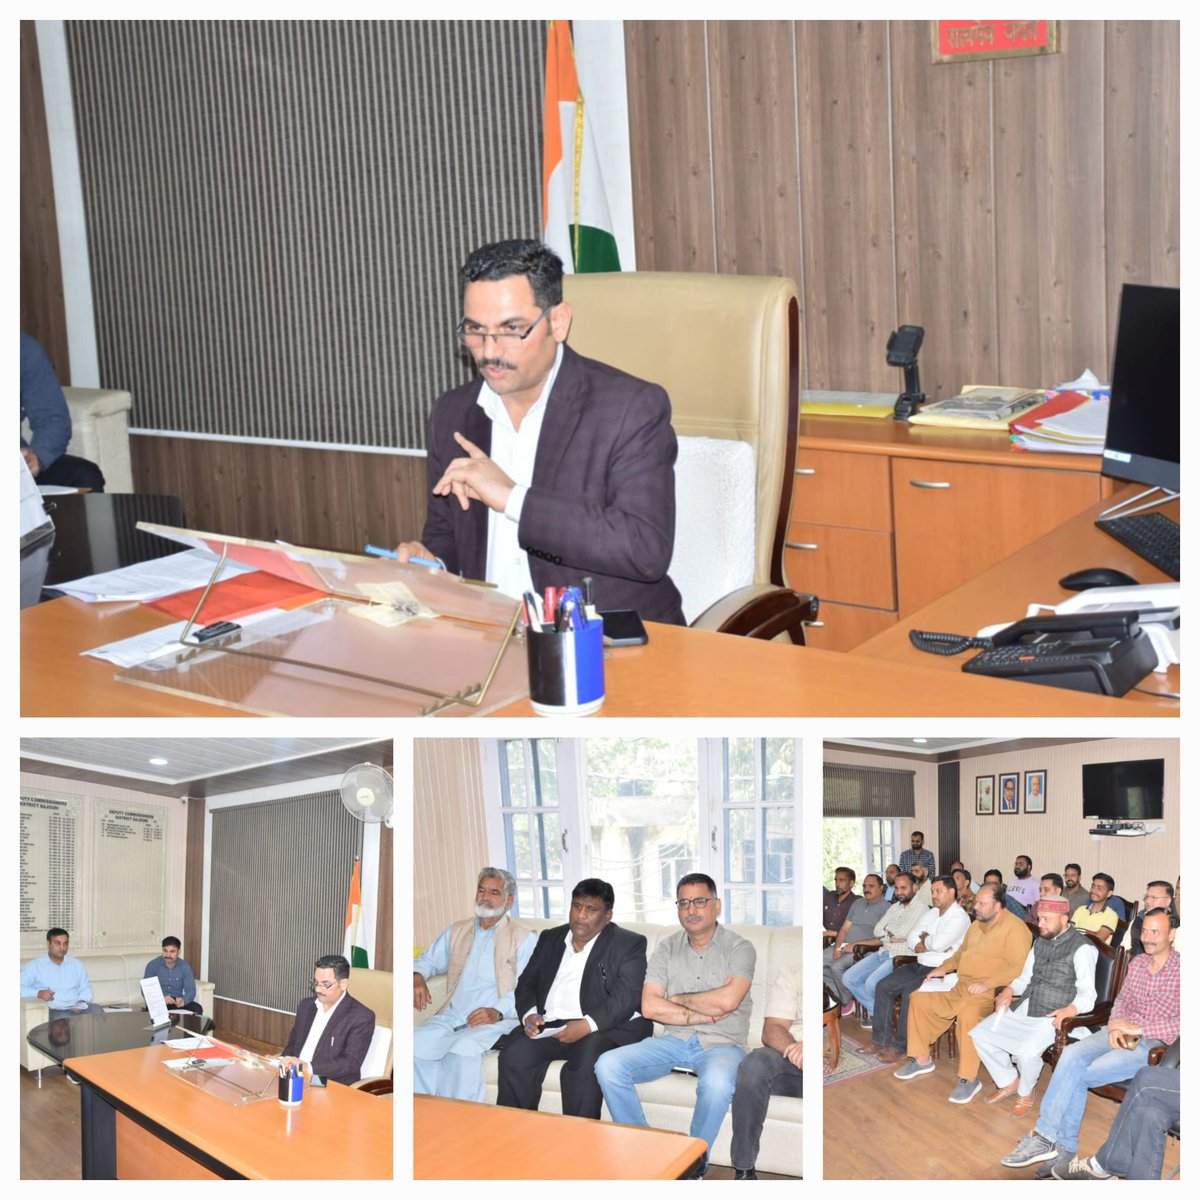 DEO Rajouri,Sh Om Parkash Bhagat, today held a meeting of Political Parties and Media Persons to sensitize them regarding provisions of MCMC, and asked to get all political advertisements pre-certified from MCMC as per ECI guidelines. #GeneralElections2024 @ceo_UTJK @diprjk